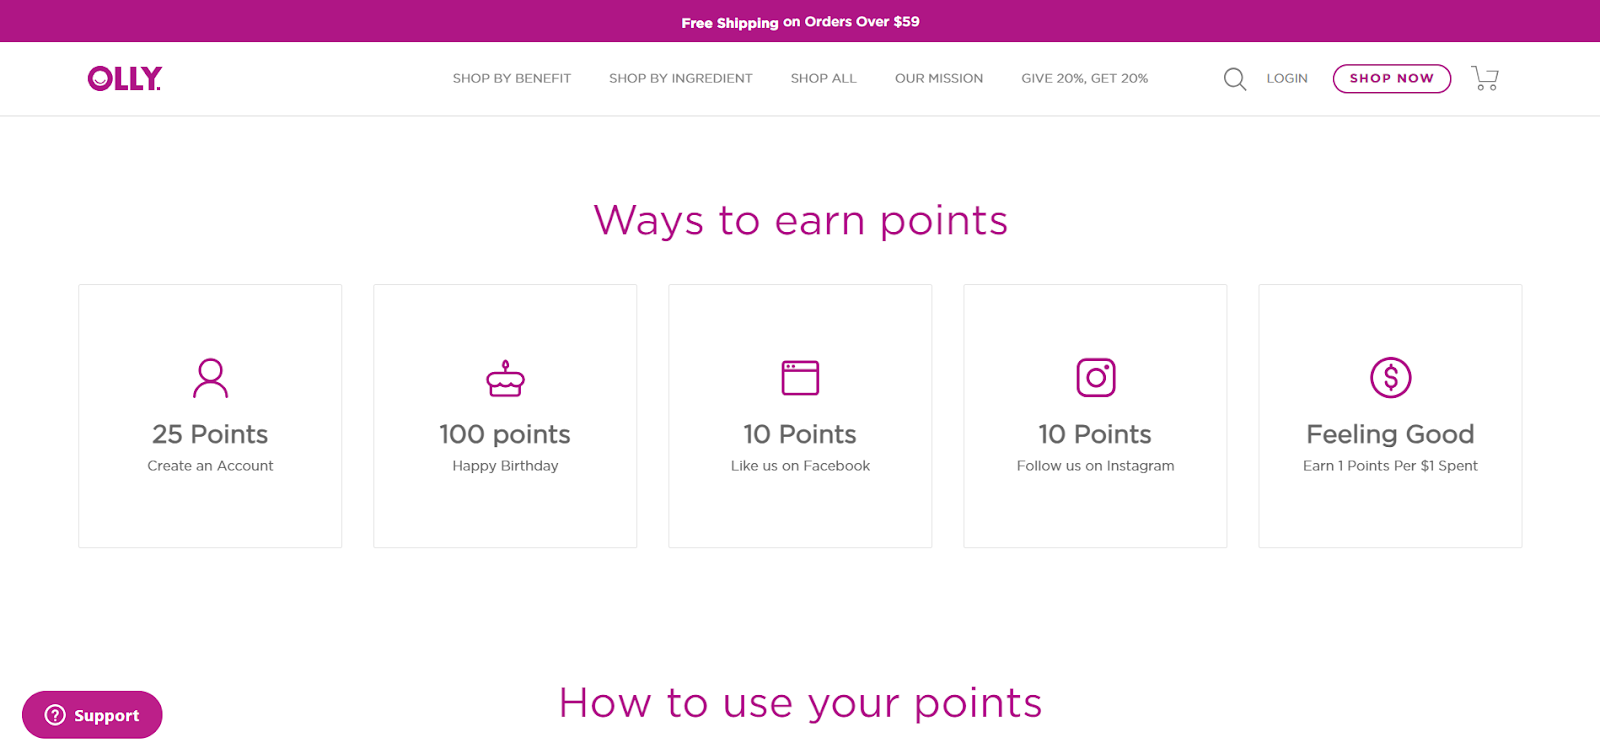 olly loyalty program landing page - how it works